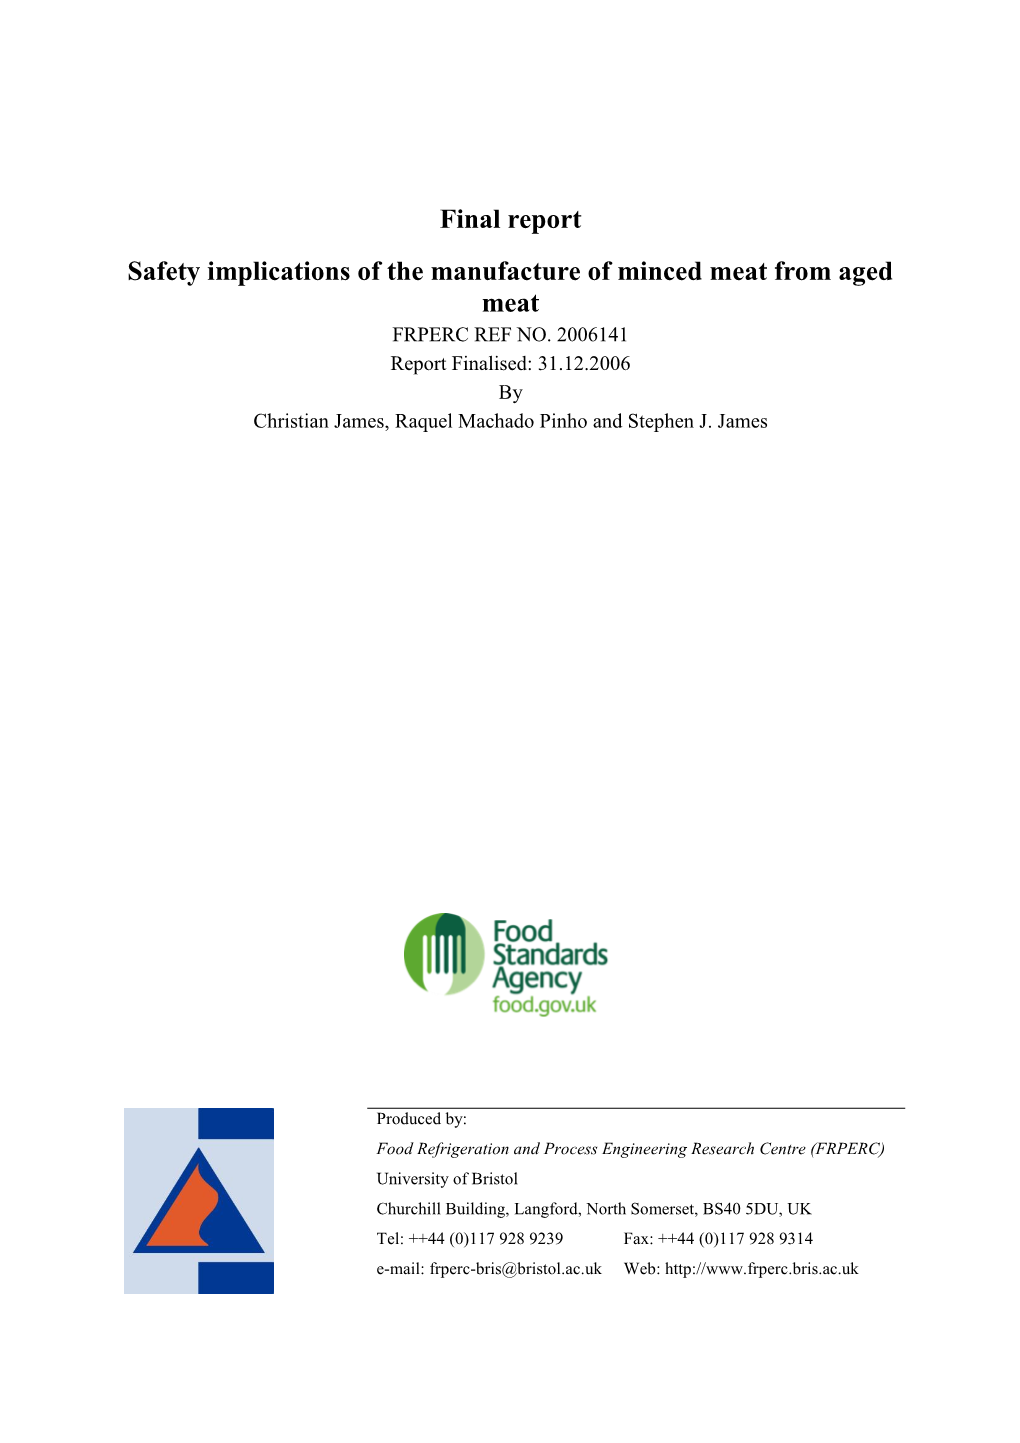 Final Report Safety Implications of the Manufacture of Minced Meat from Aged Meat FRPERC REF NO